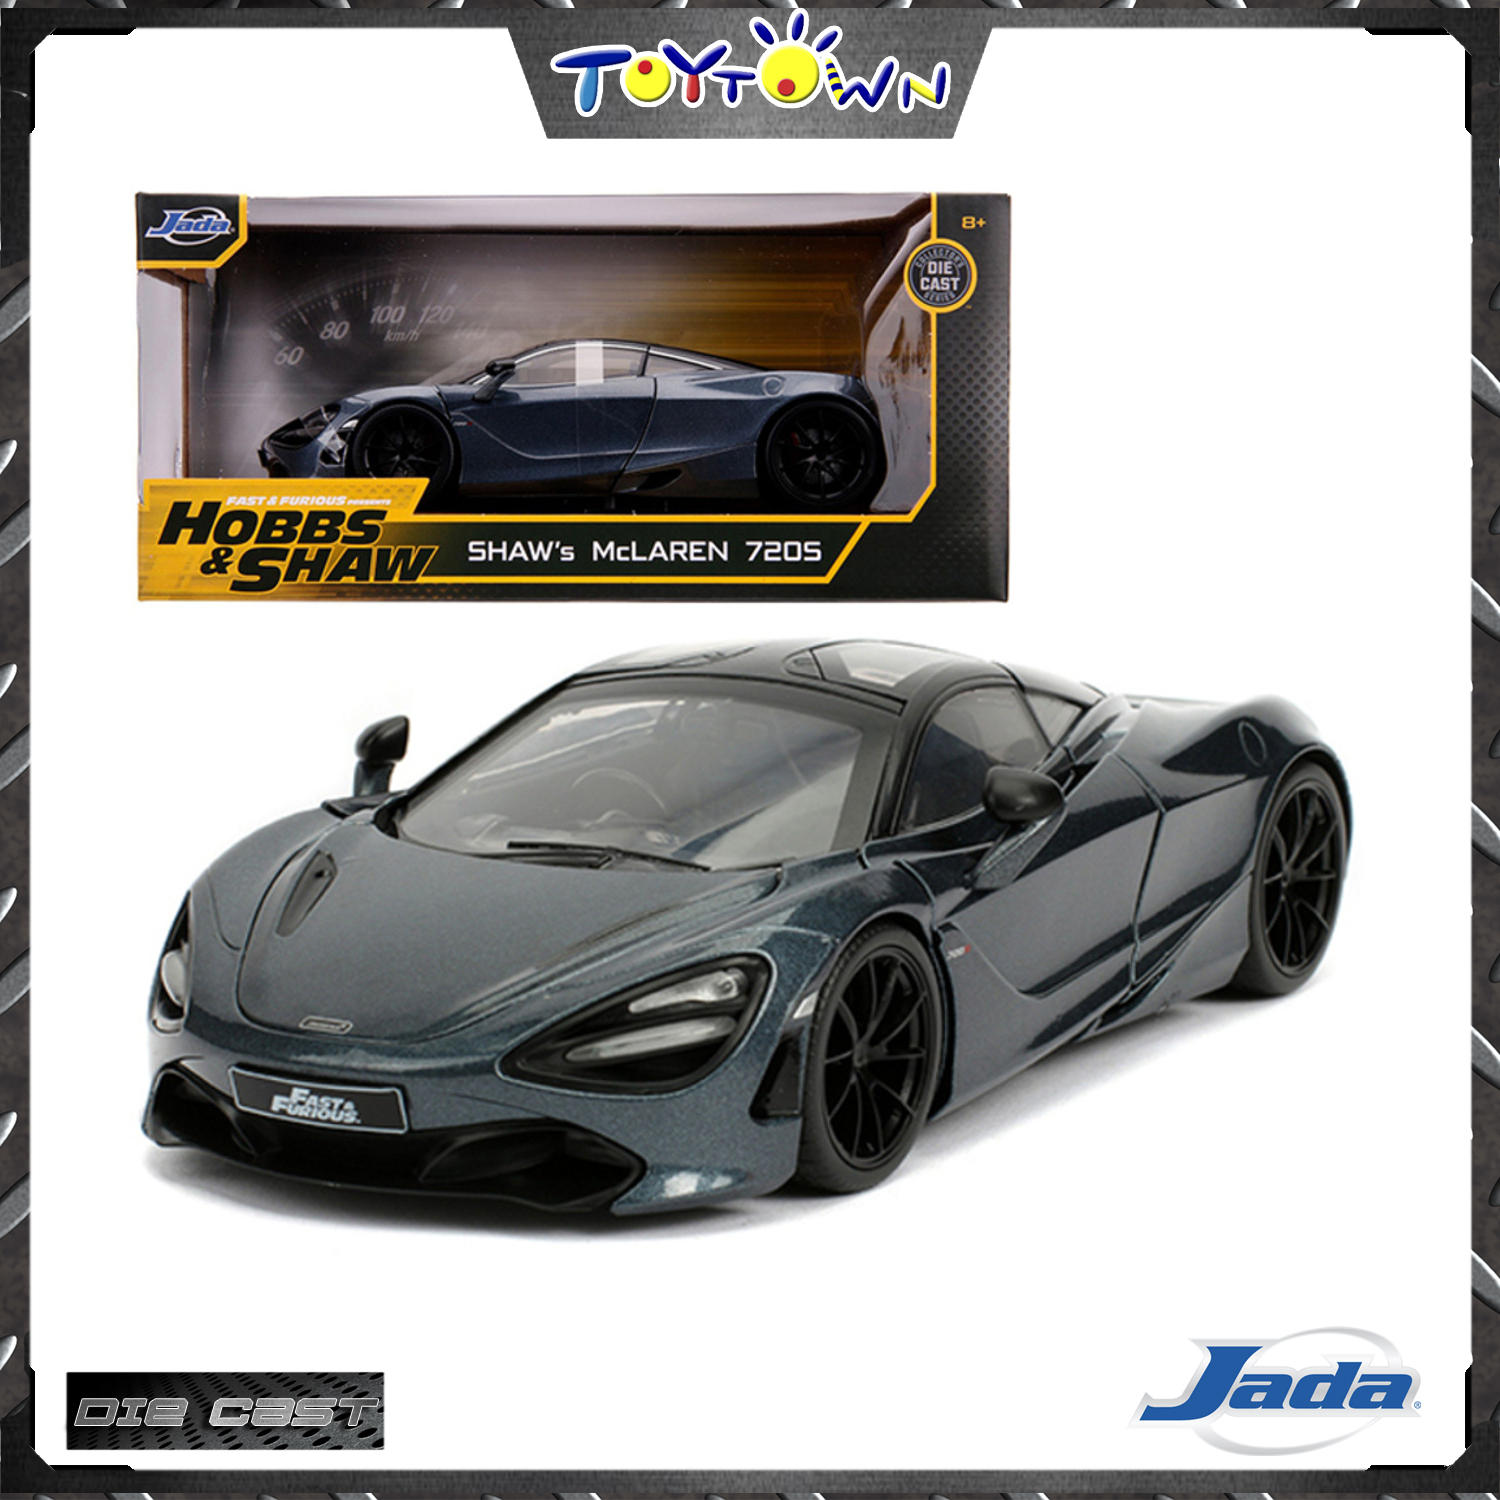 Fast & Furious Presents Hobbs & Shaw Shaw’s 2018 McLaren 720S Metals 1/24th